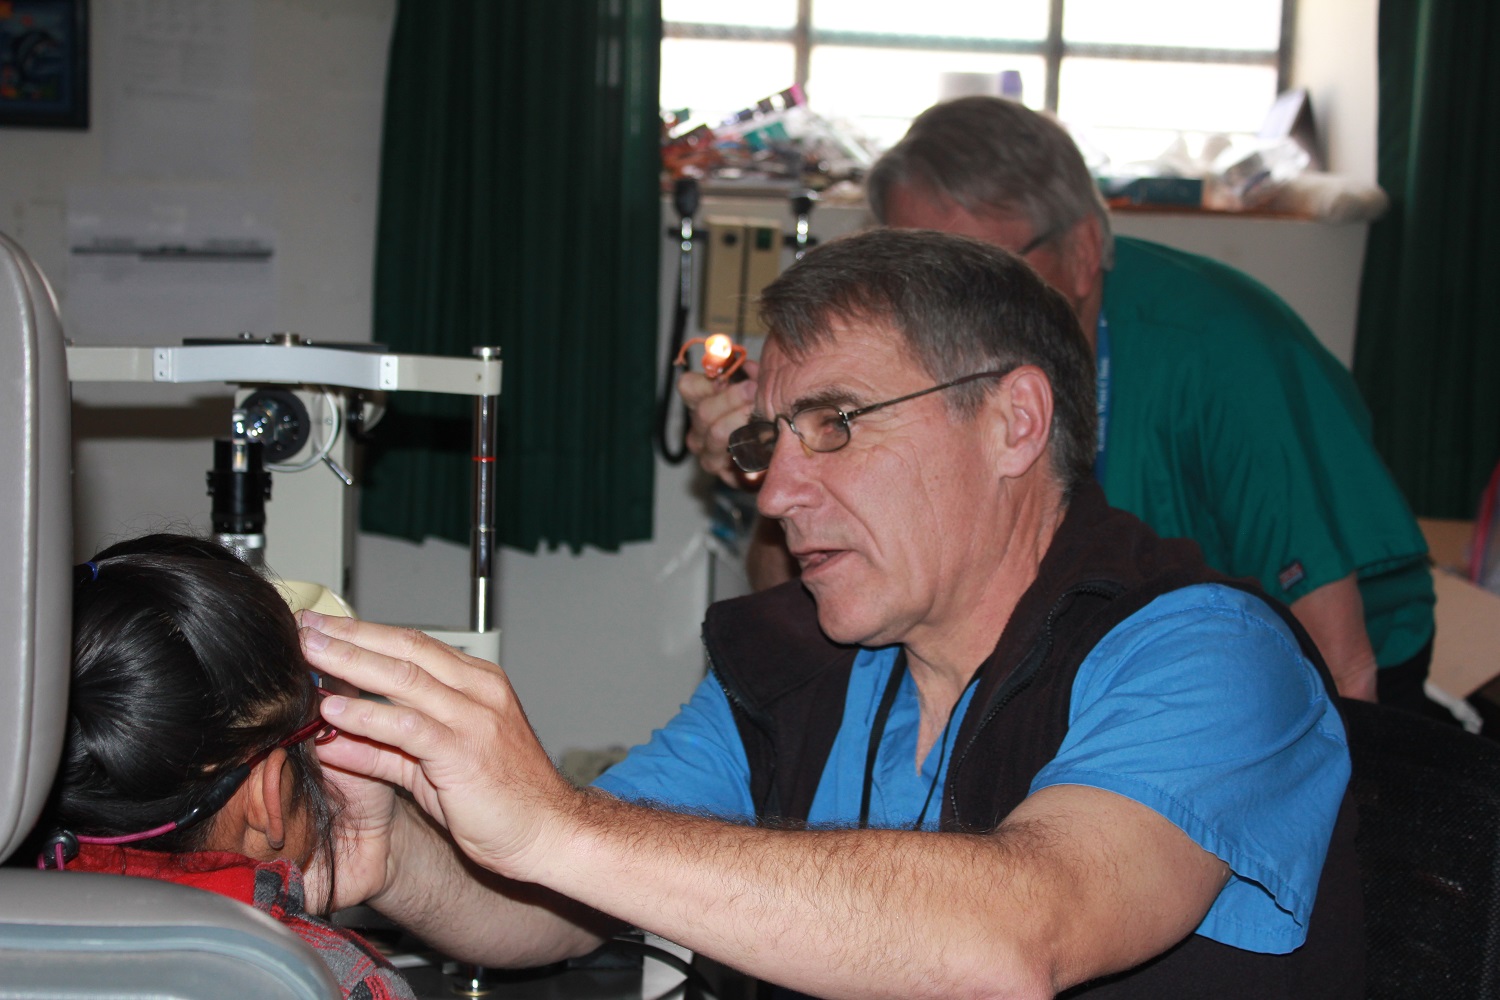 Dr. Paul Schultz Performing an Eye Exam on a Child